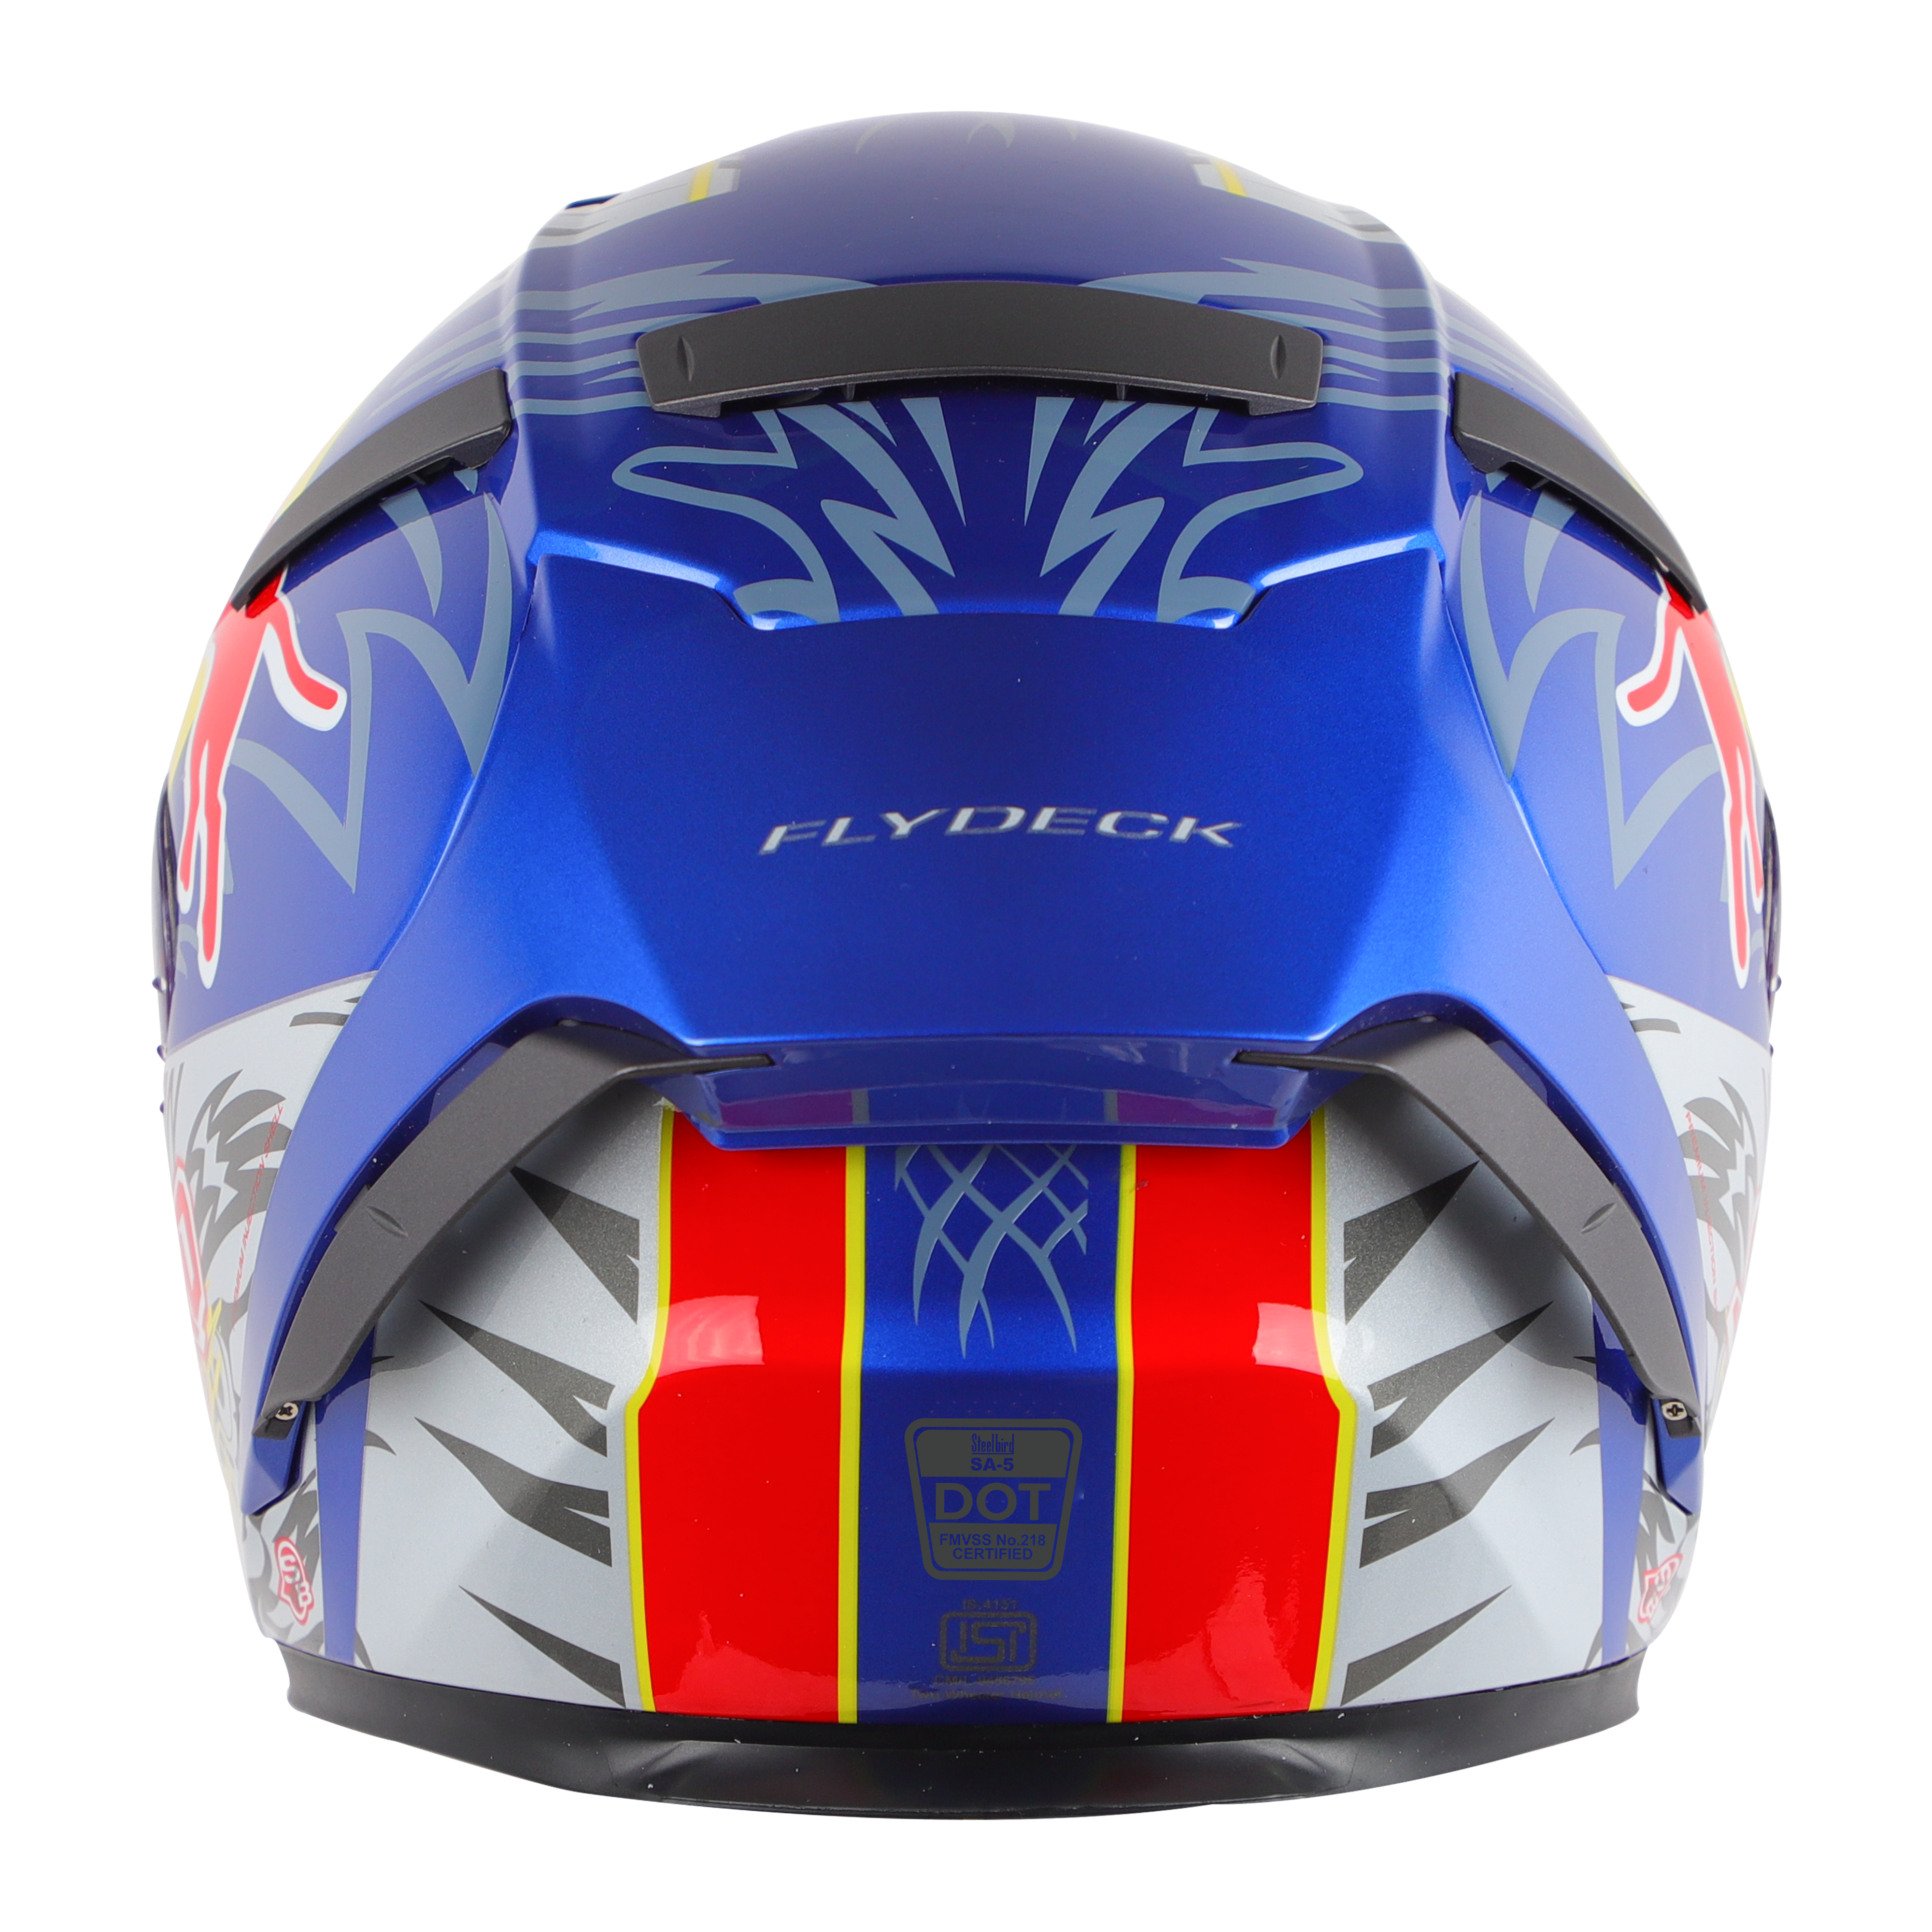 SA-5 DOT FLYDECK GLOSSY Y.BLUE WITH YELLOW (WITH ANTI-FOG SHIELD VISOR) 